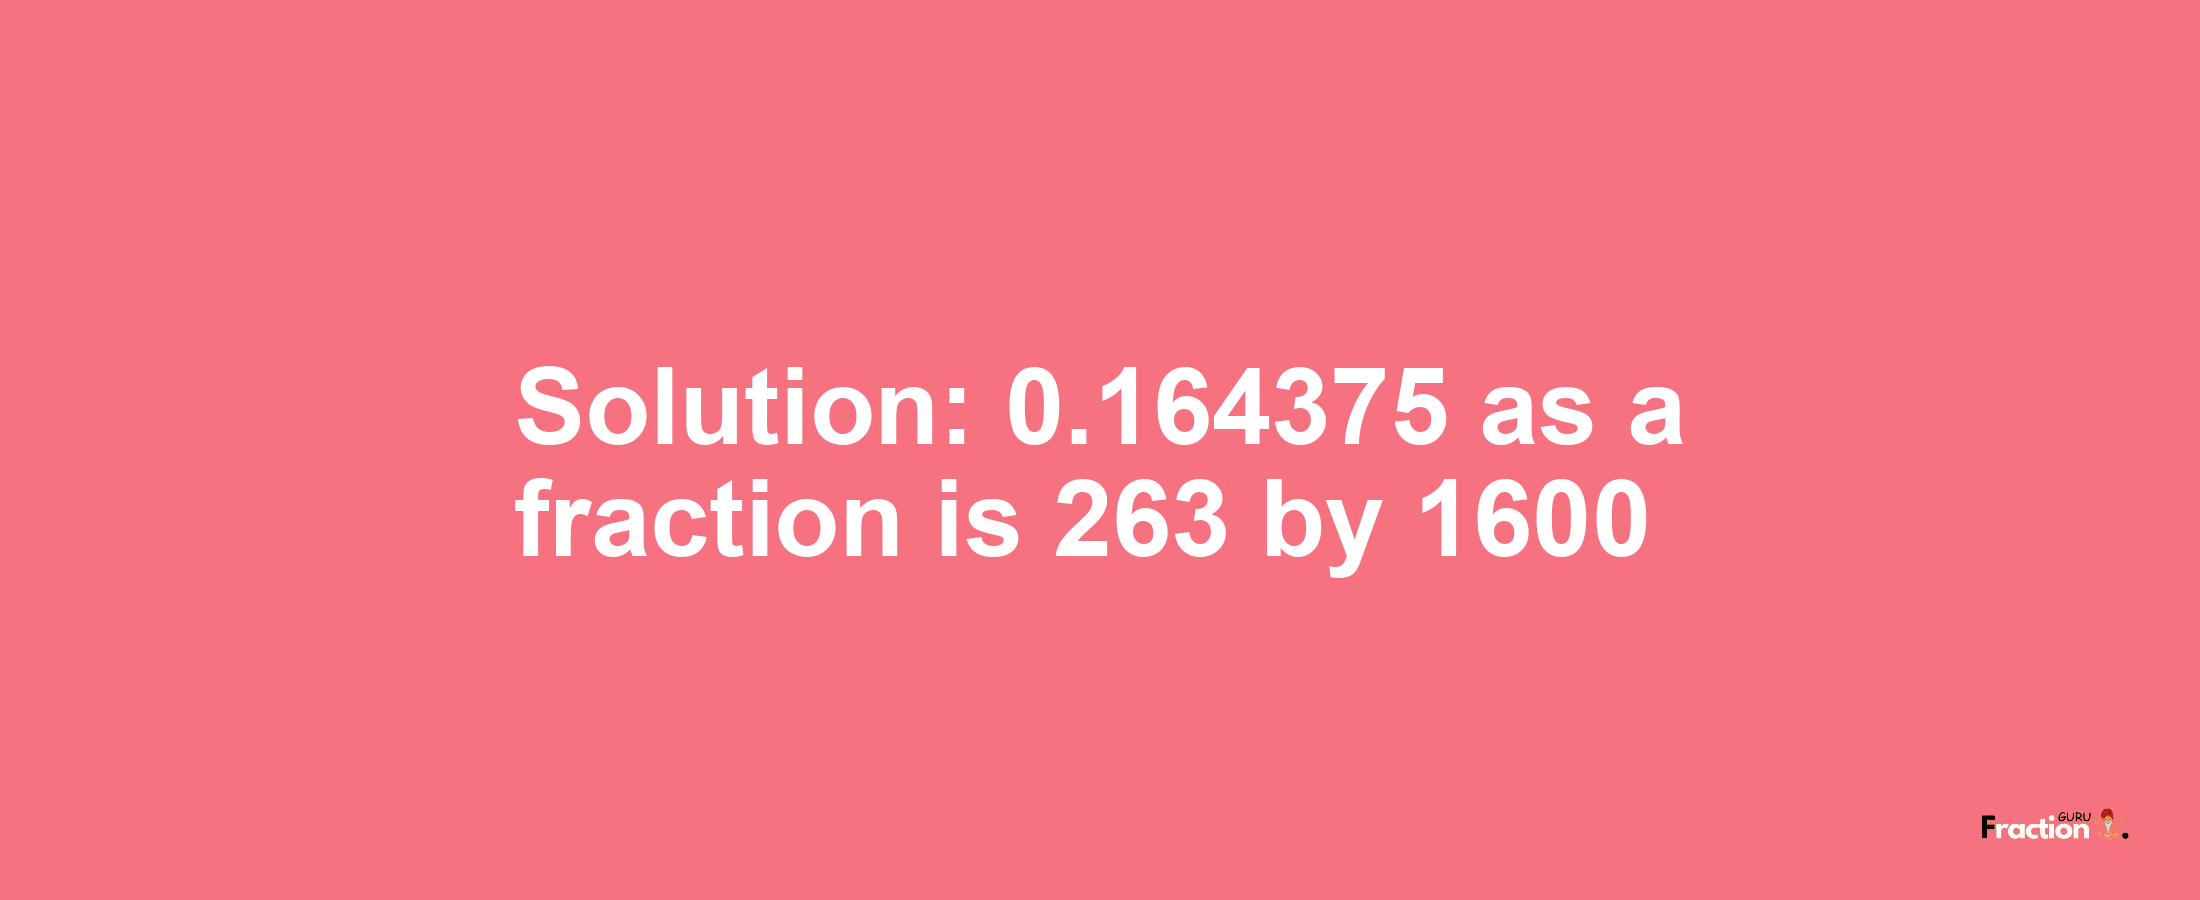 Solution:0.164375 as a fraction is 263/1600